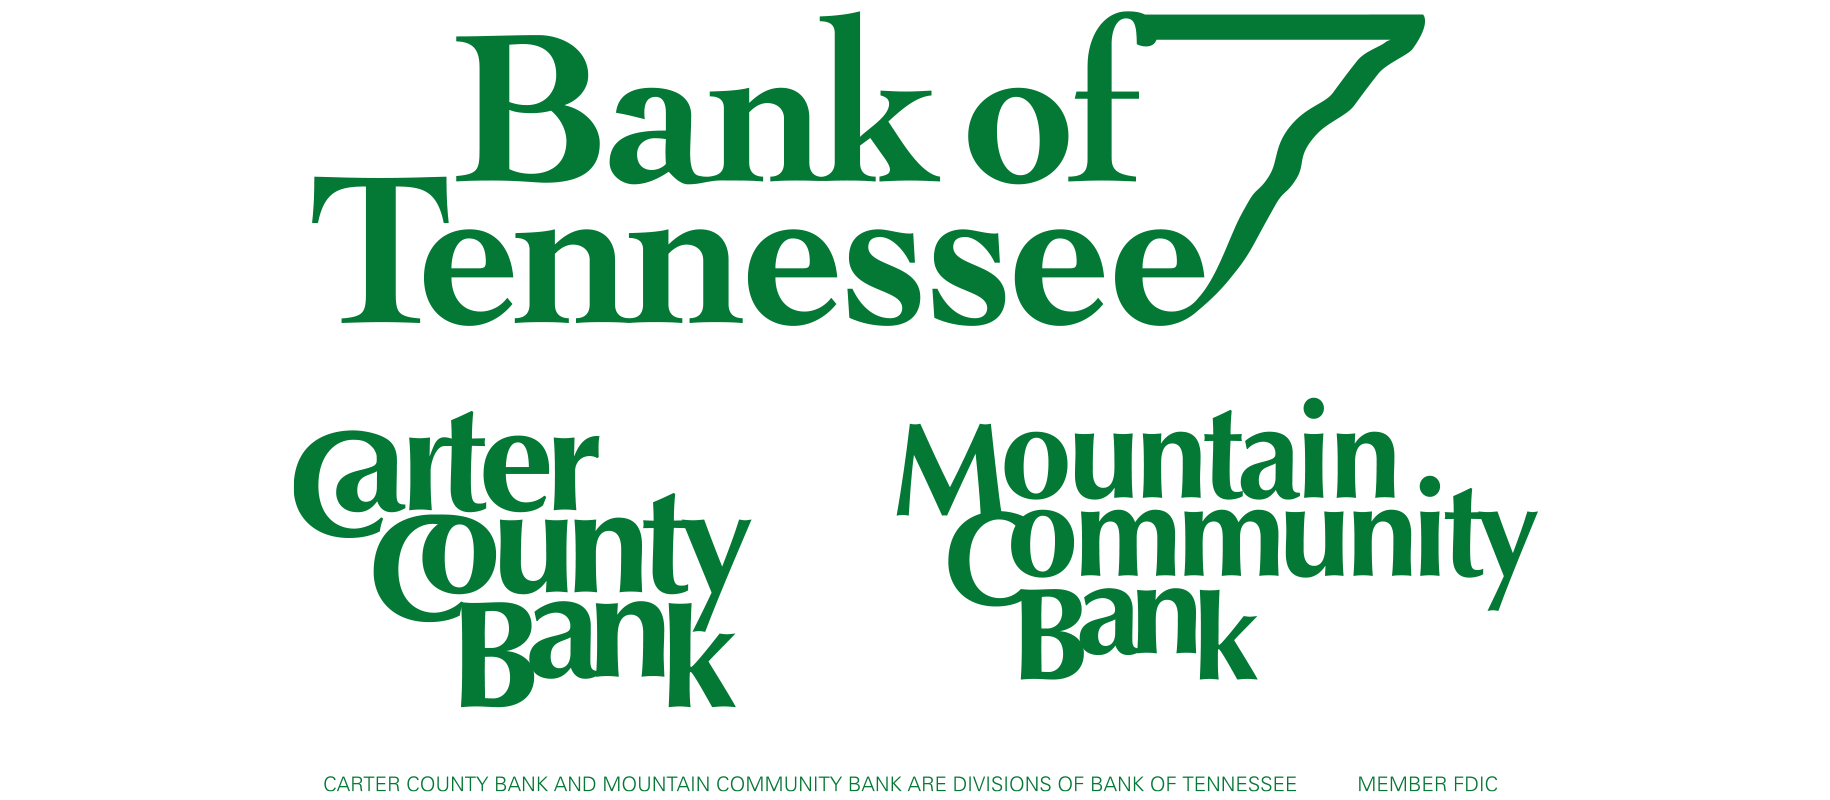 Grow Your Small Business - Bank of Tennessee